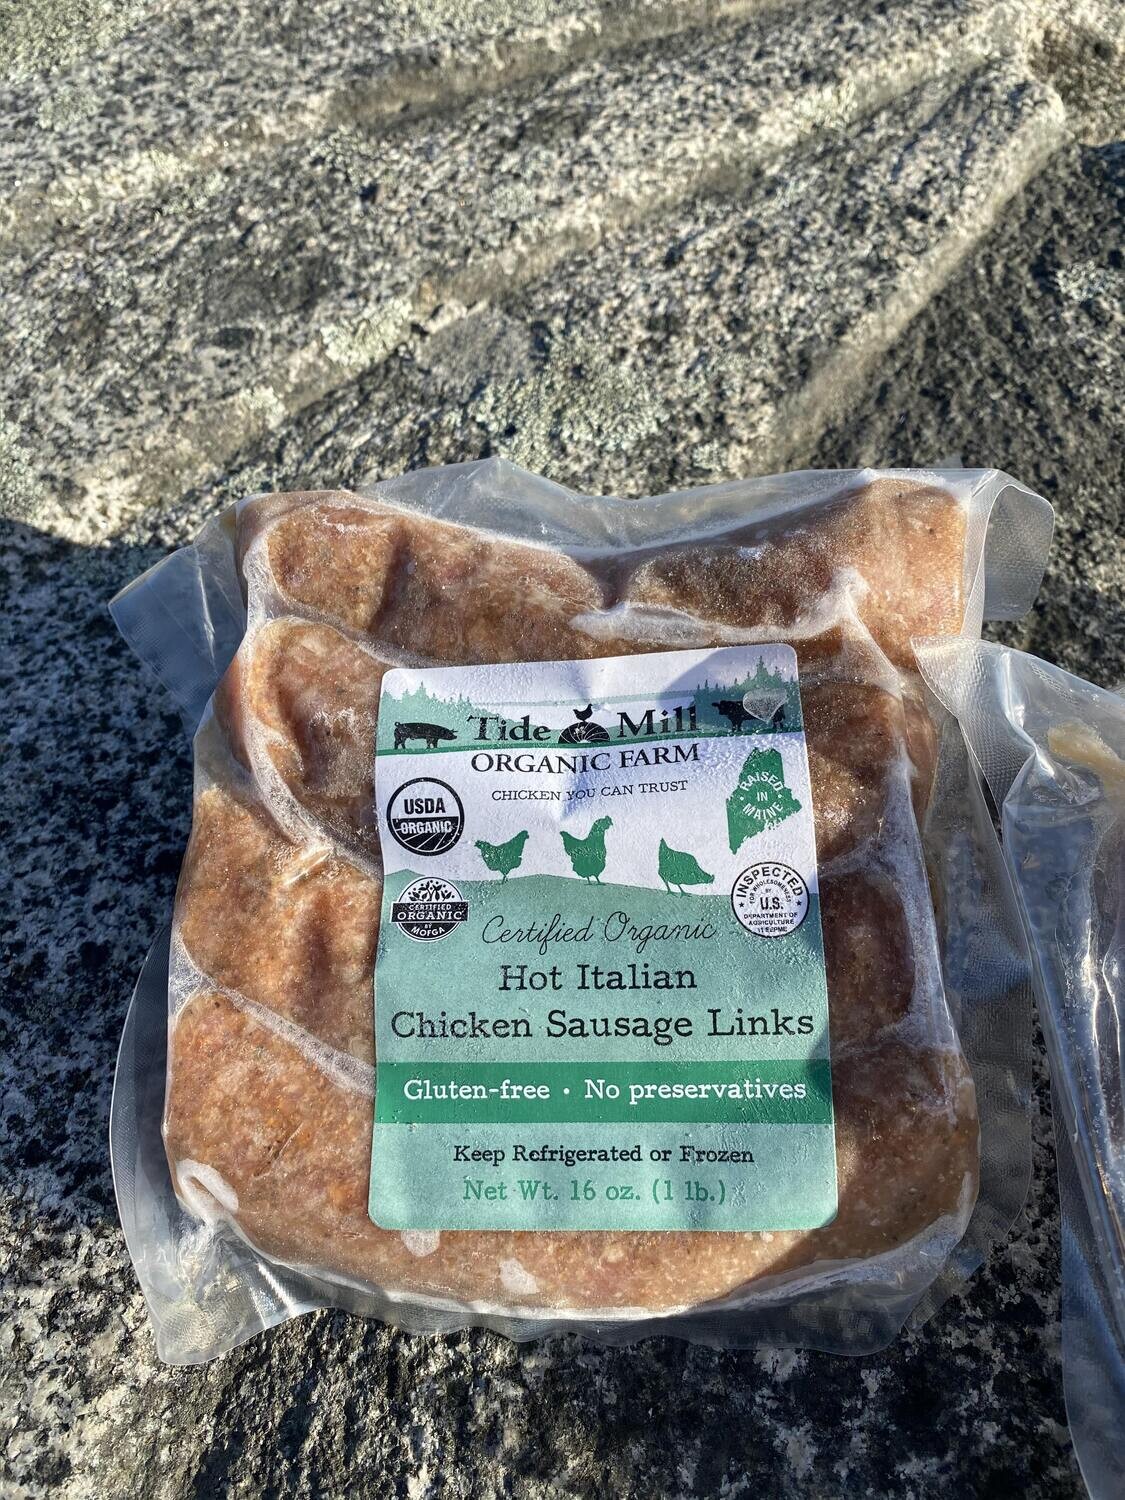 A package of organic hot italian chicken sausage links